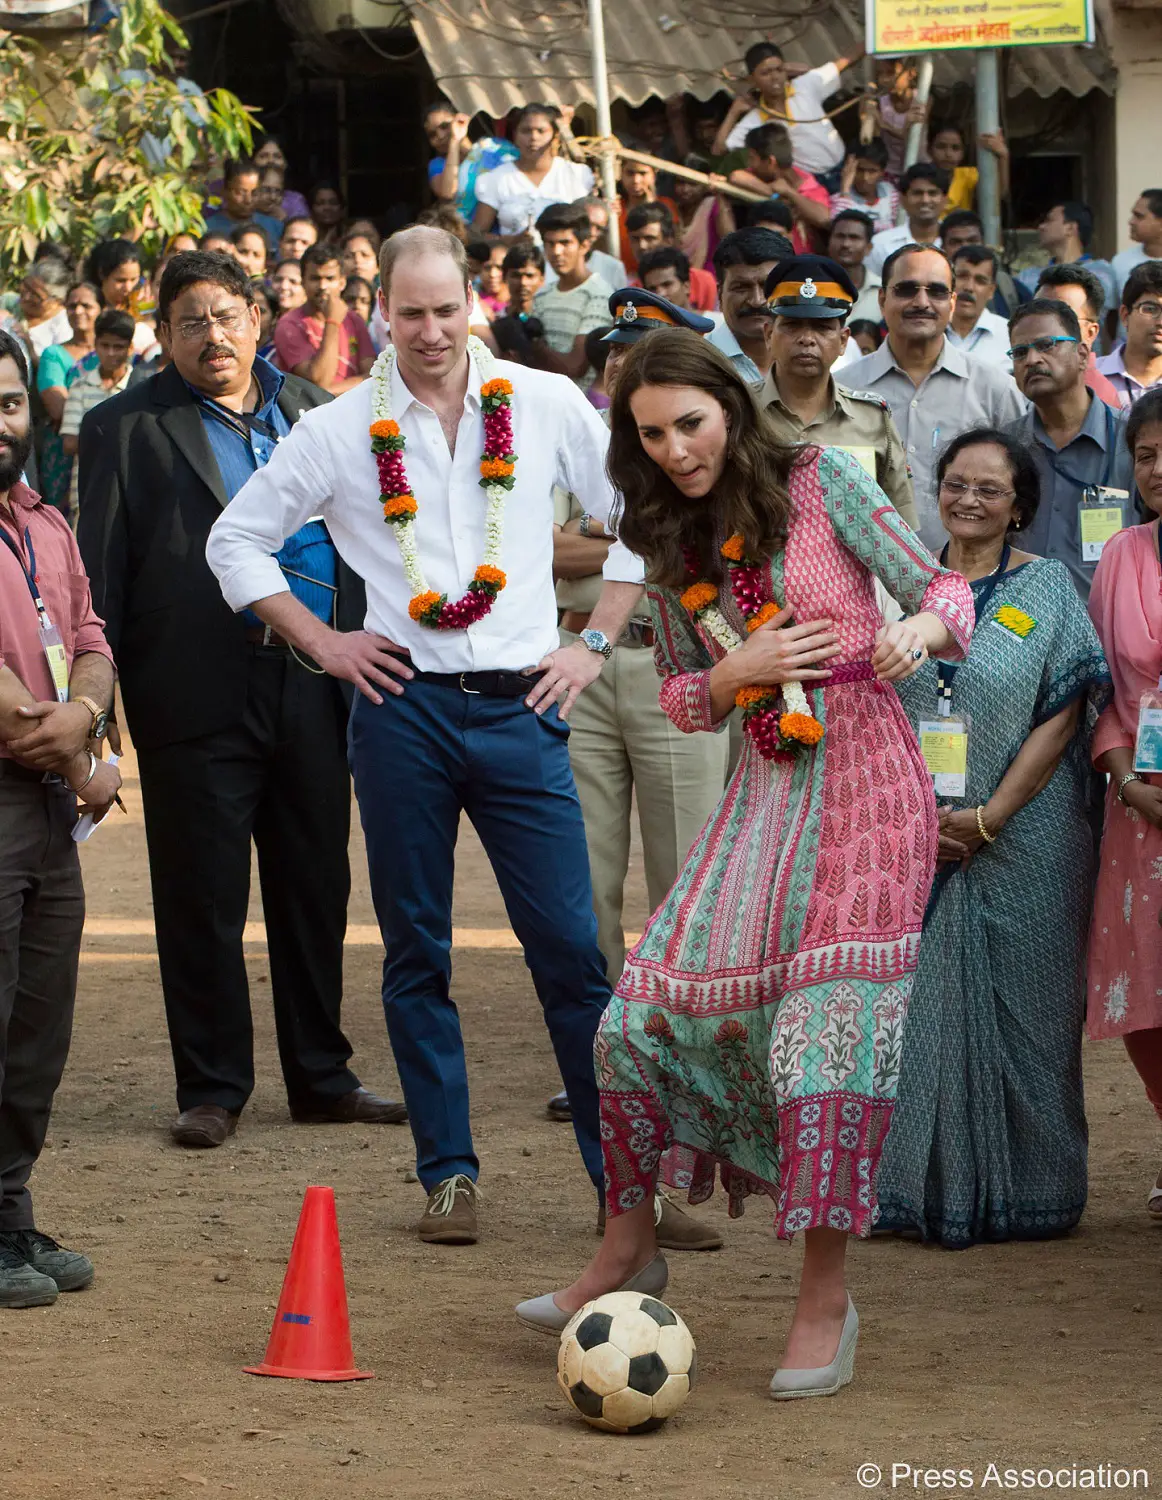 The Duke and Duchess were equally enjoying the day with children.